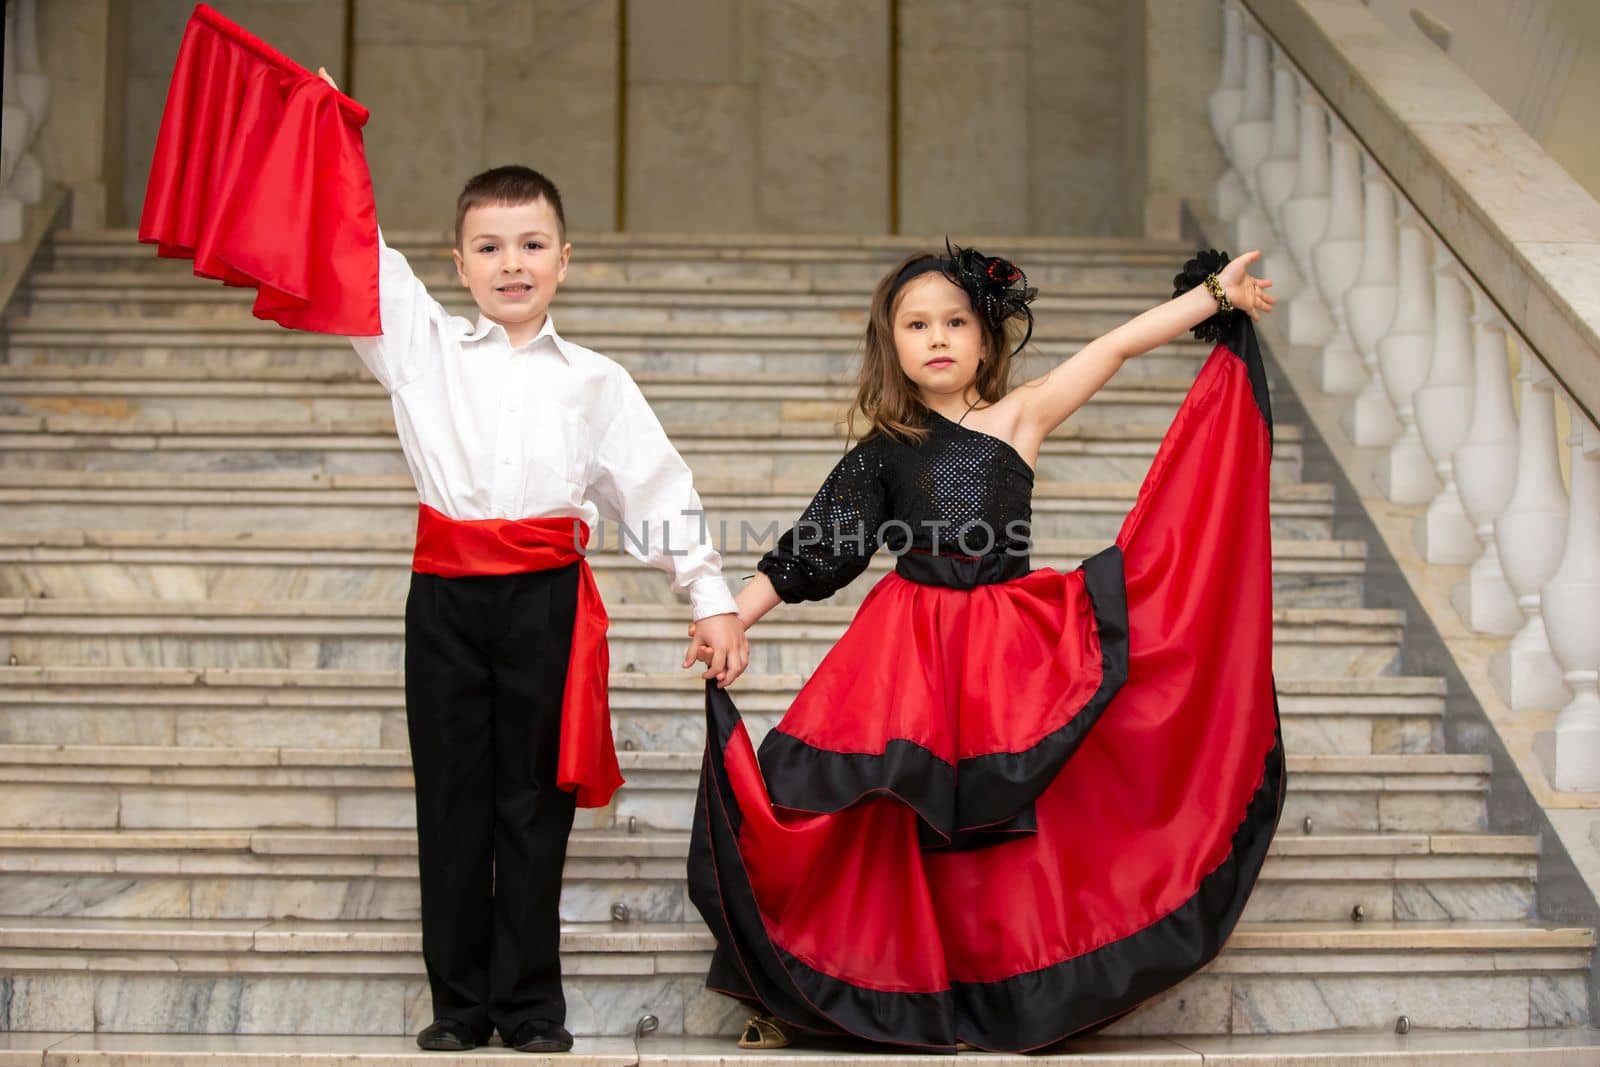 Belarus, city of Gomel, May 21, 2021 Children's holiday in the city. Boy and girl in national Spanish clothes. by Sviatlana